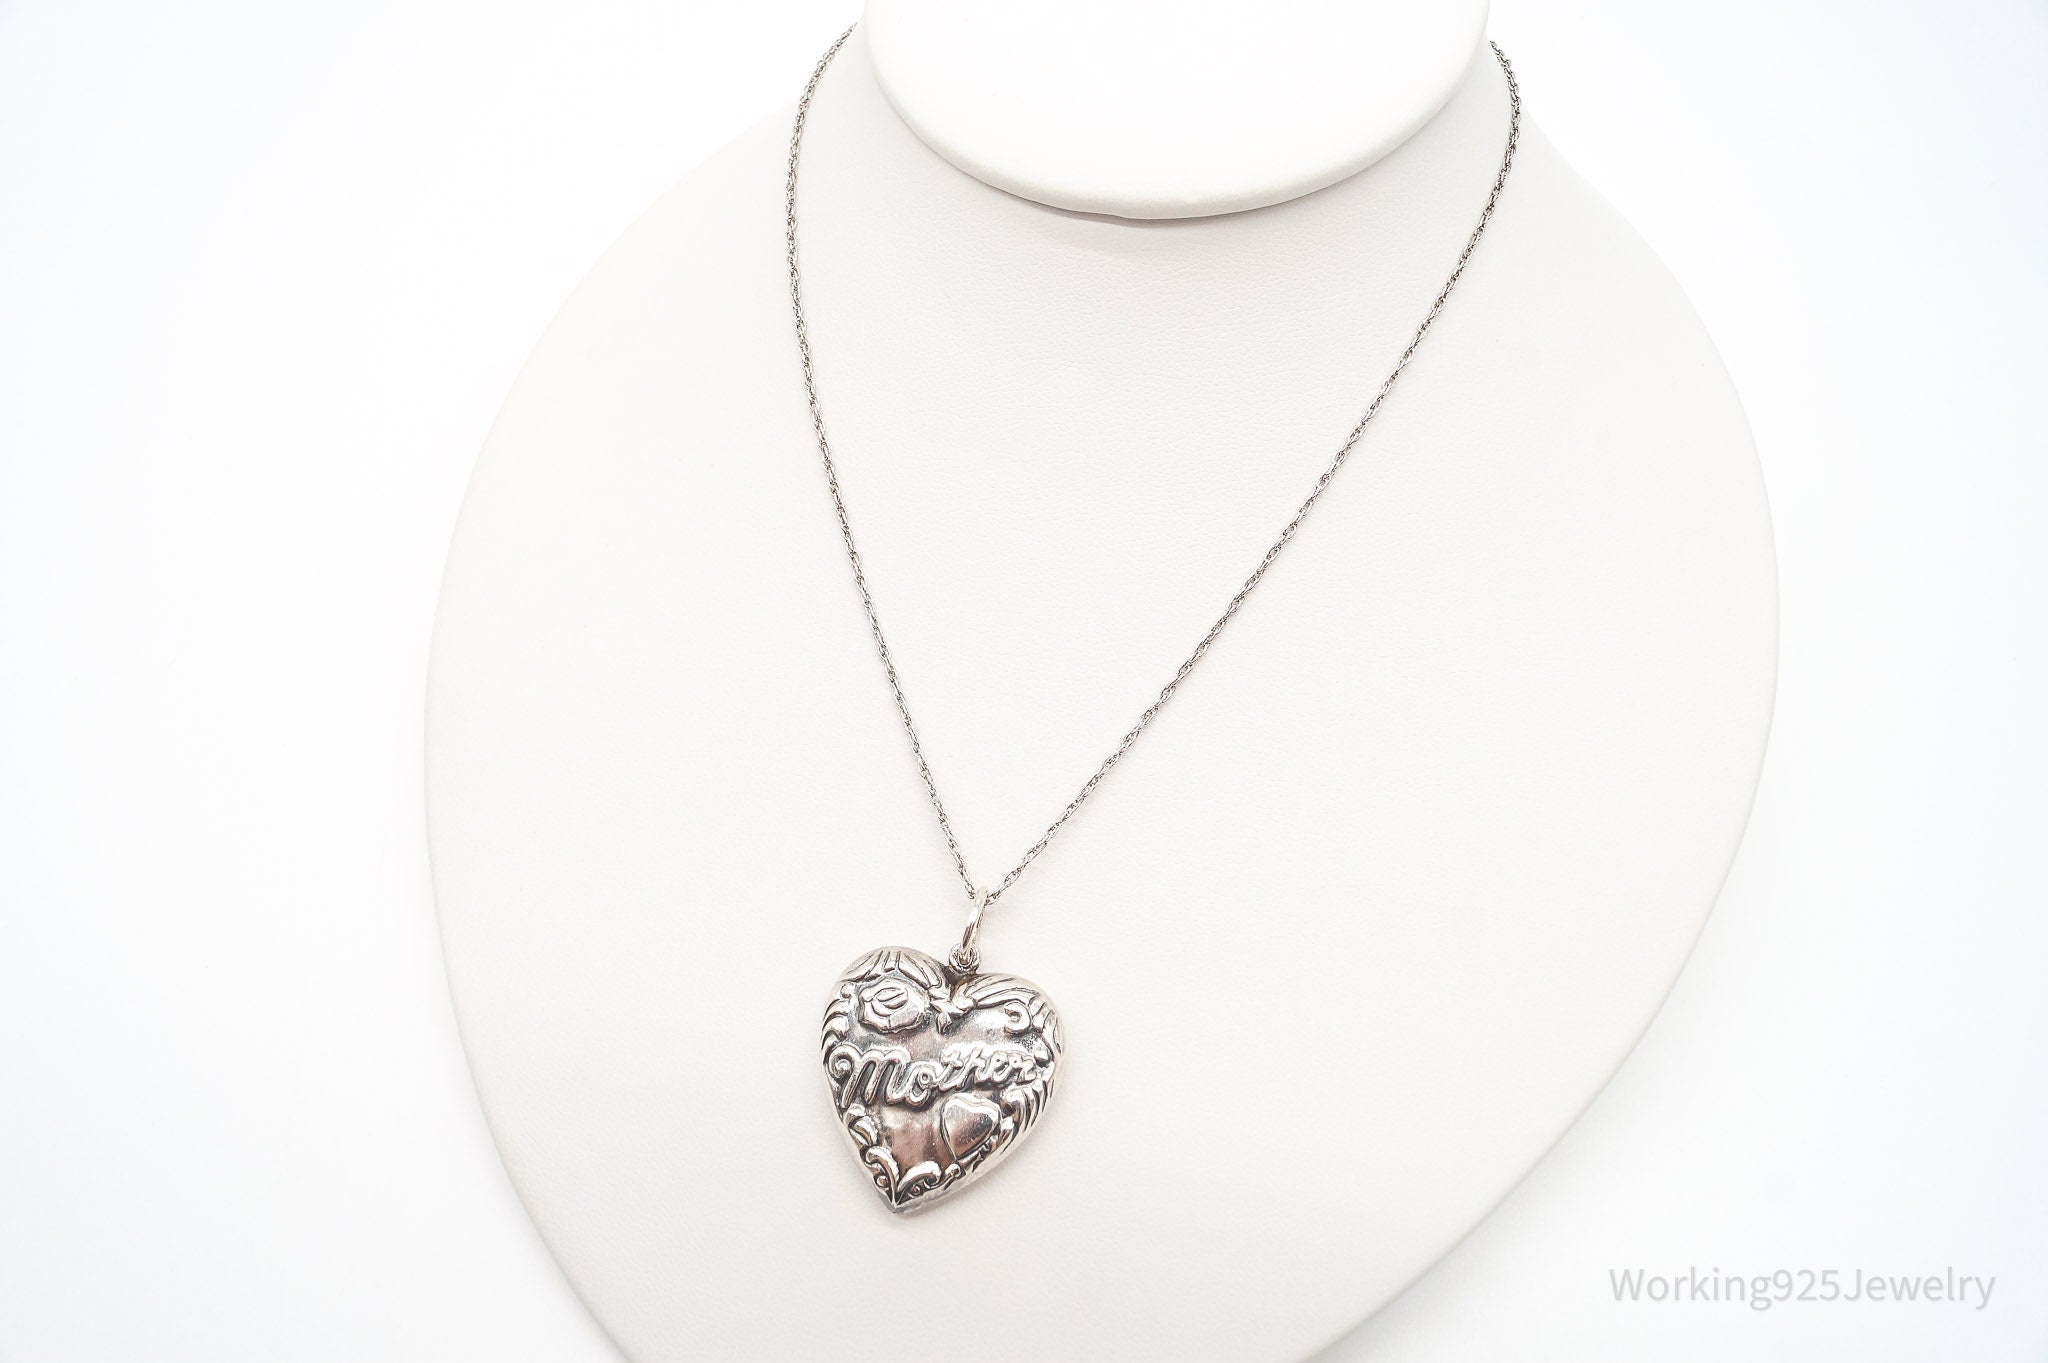 Vintage Large Puffy Heart Mother Charm Sterling Silver Necklace